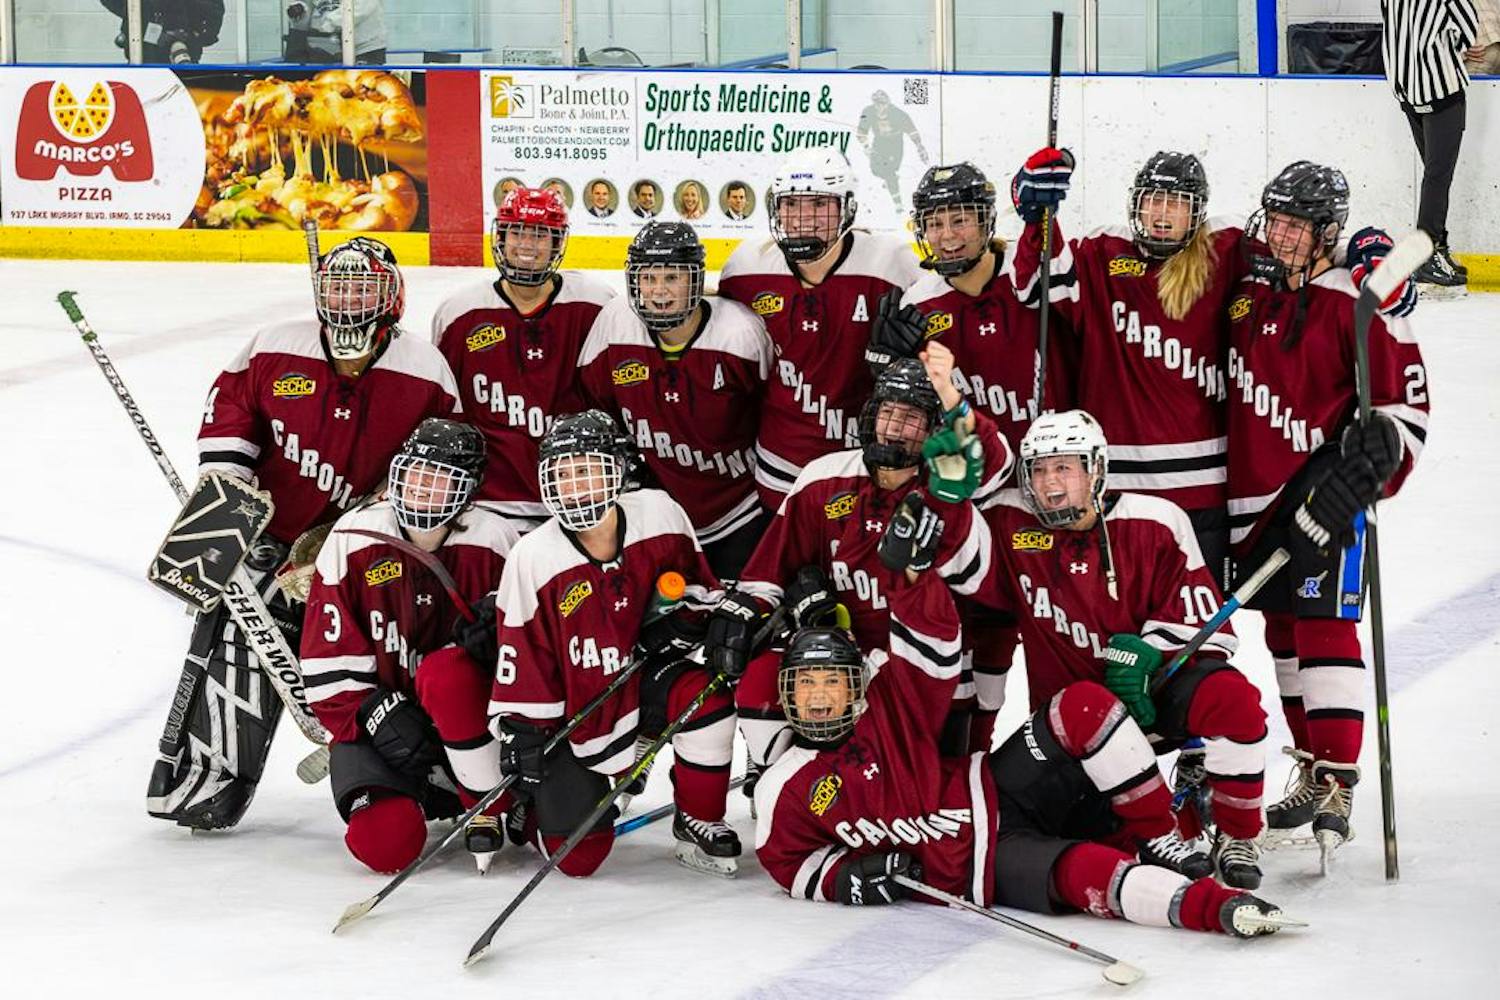 The University of South Carolina's Women's Club Ice Hockey team celebrates after its 2-1 victory against the U-19 South Carolina Lady Warriors on Oct. 1, 2023, in Irmo, South Carolina. The women's hockey team went on to play in the collegiate hockey playoffs.